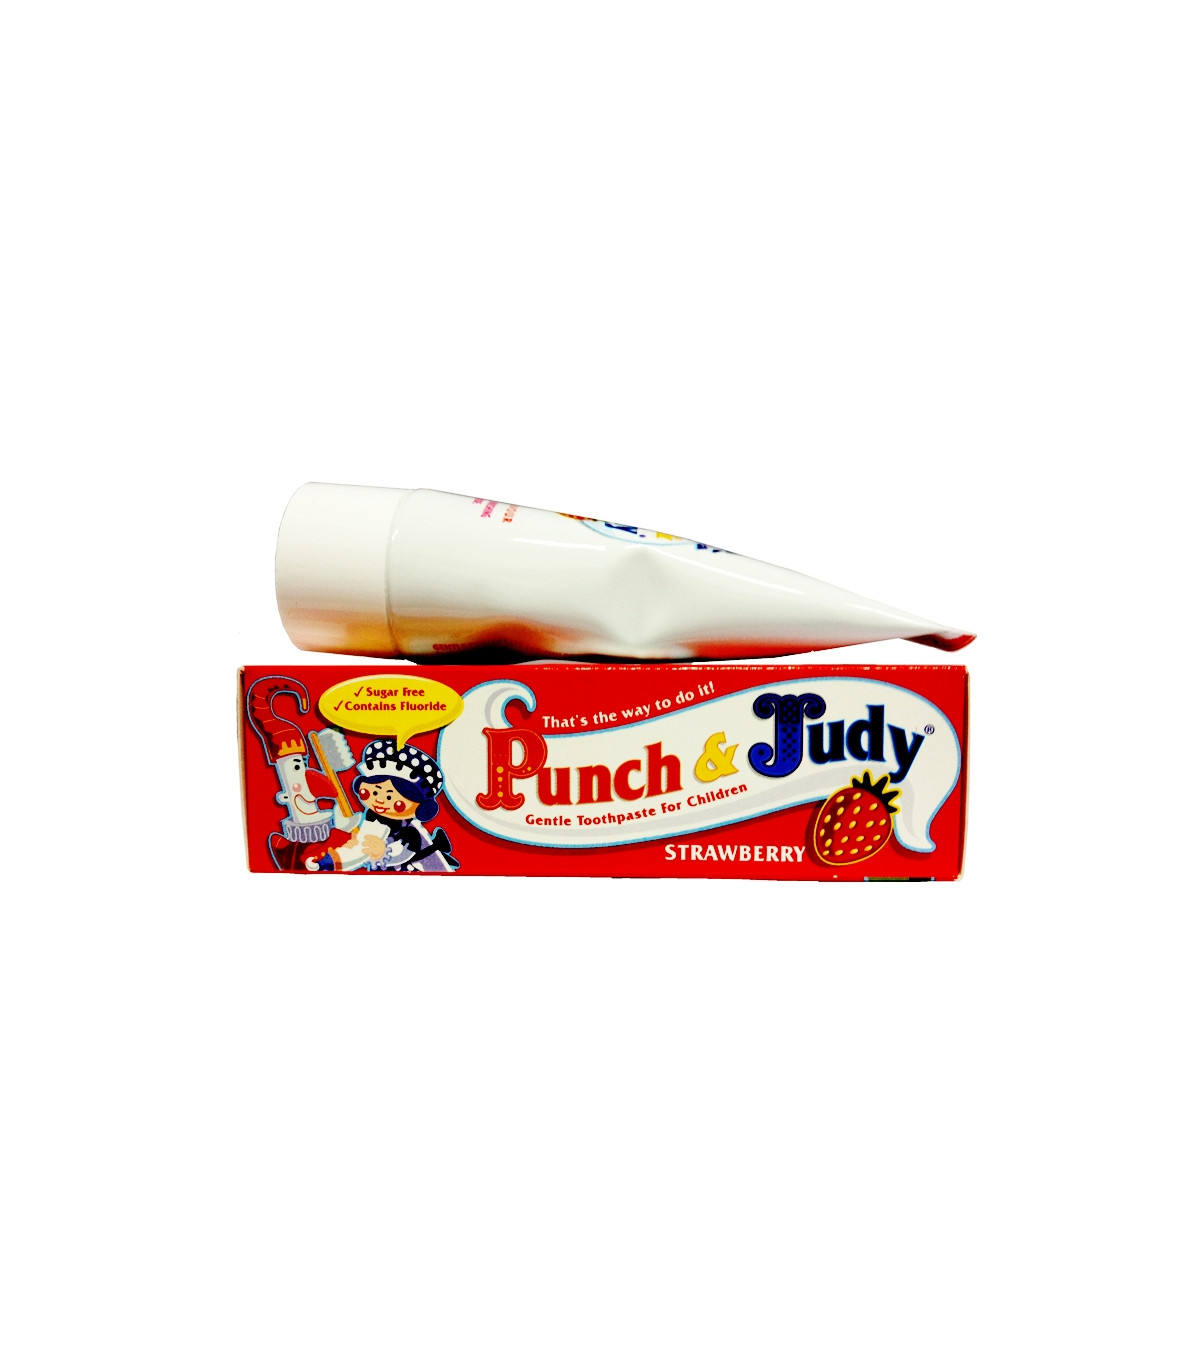 Punch & Judy Strawberry Flavour Toothpaste - 50ml